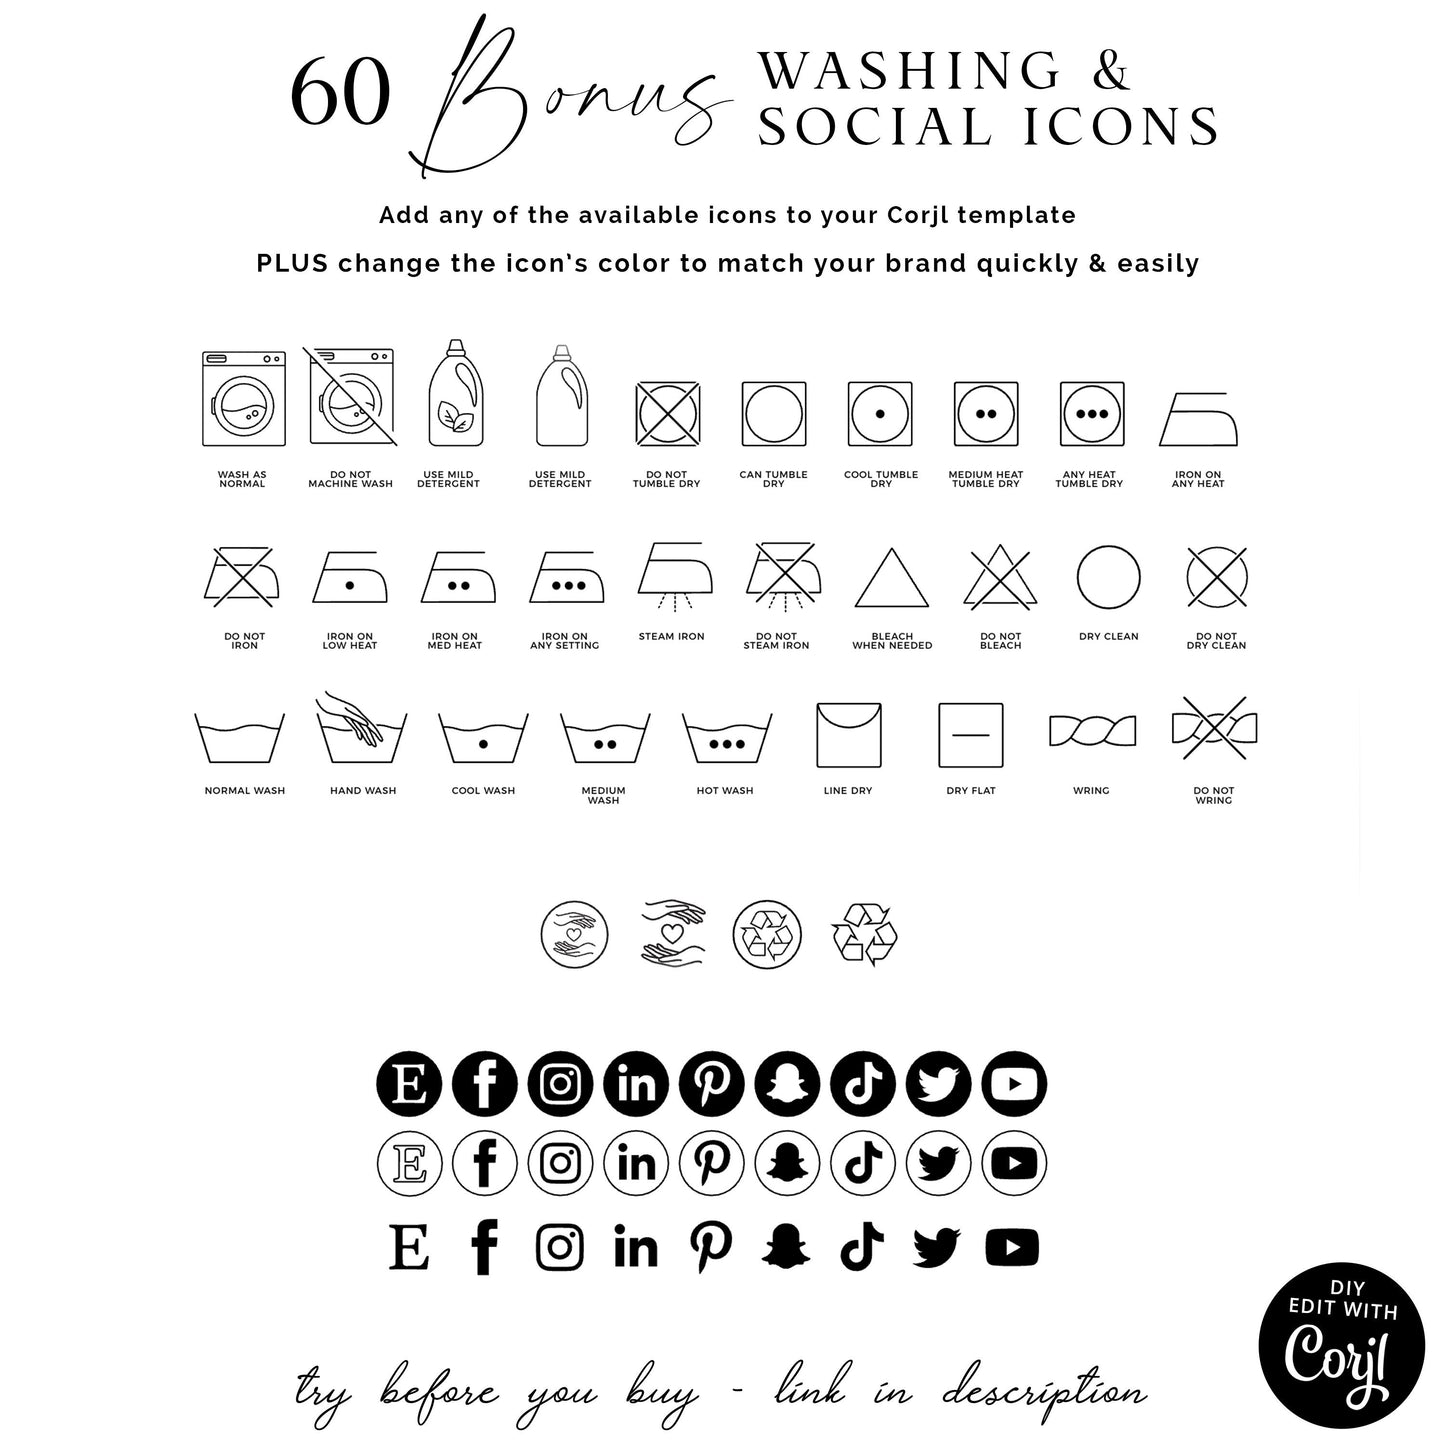 Washing Instructions Card Template, Editable Laundry Care Card, Printable T-Shirt Care Instructions, Minimalist Clothing Care Note KK-001